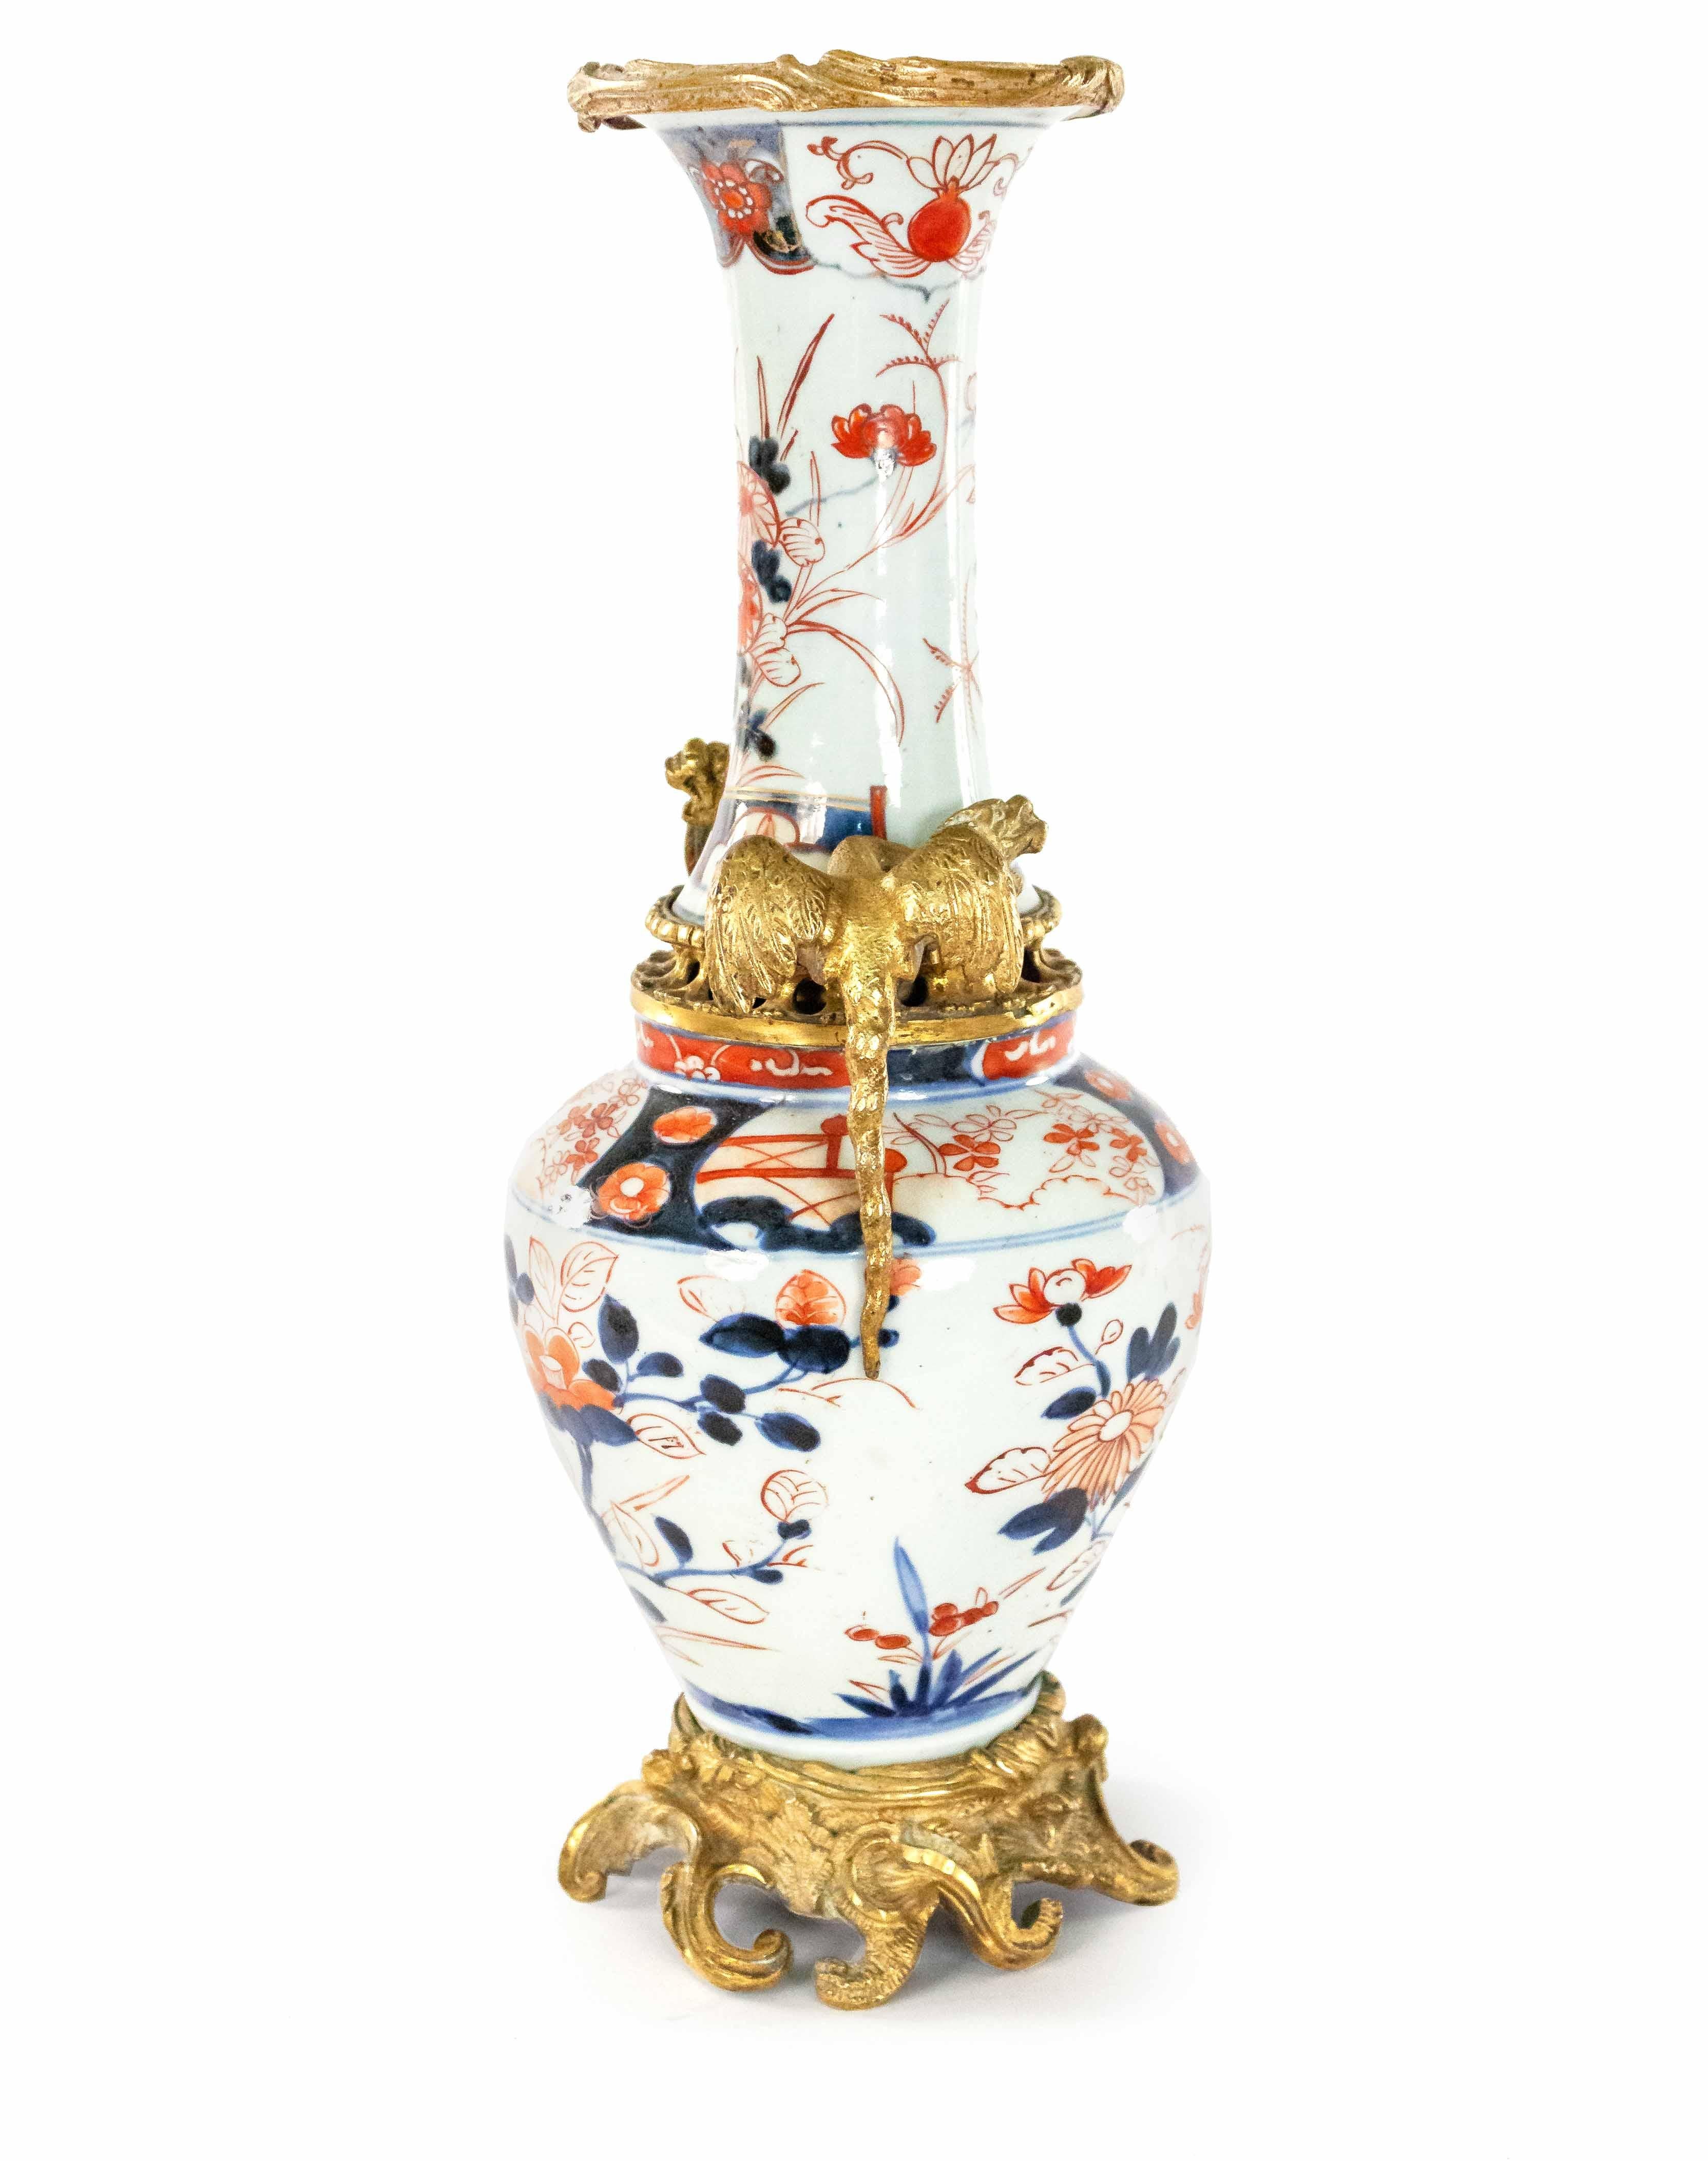 Pair of Asian Japanese Imari rose porcelain shaped vases with decorative gilt bronze dragons flanking each side (19th-20th century).